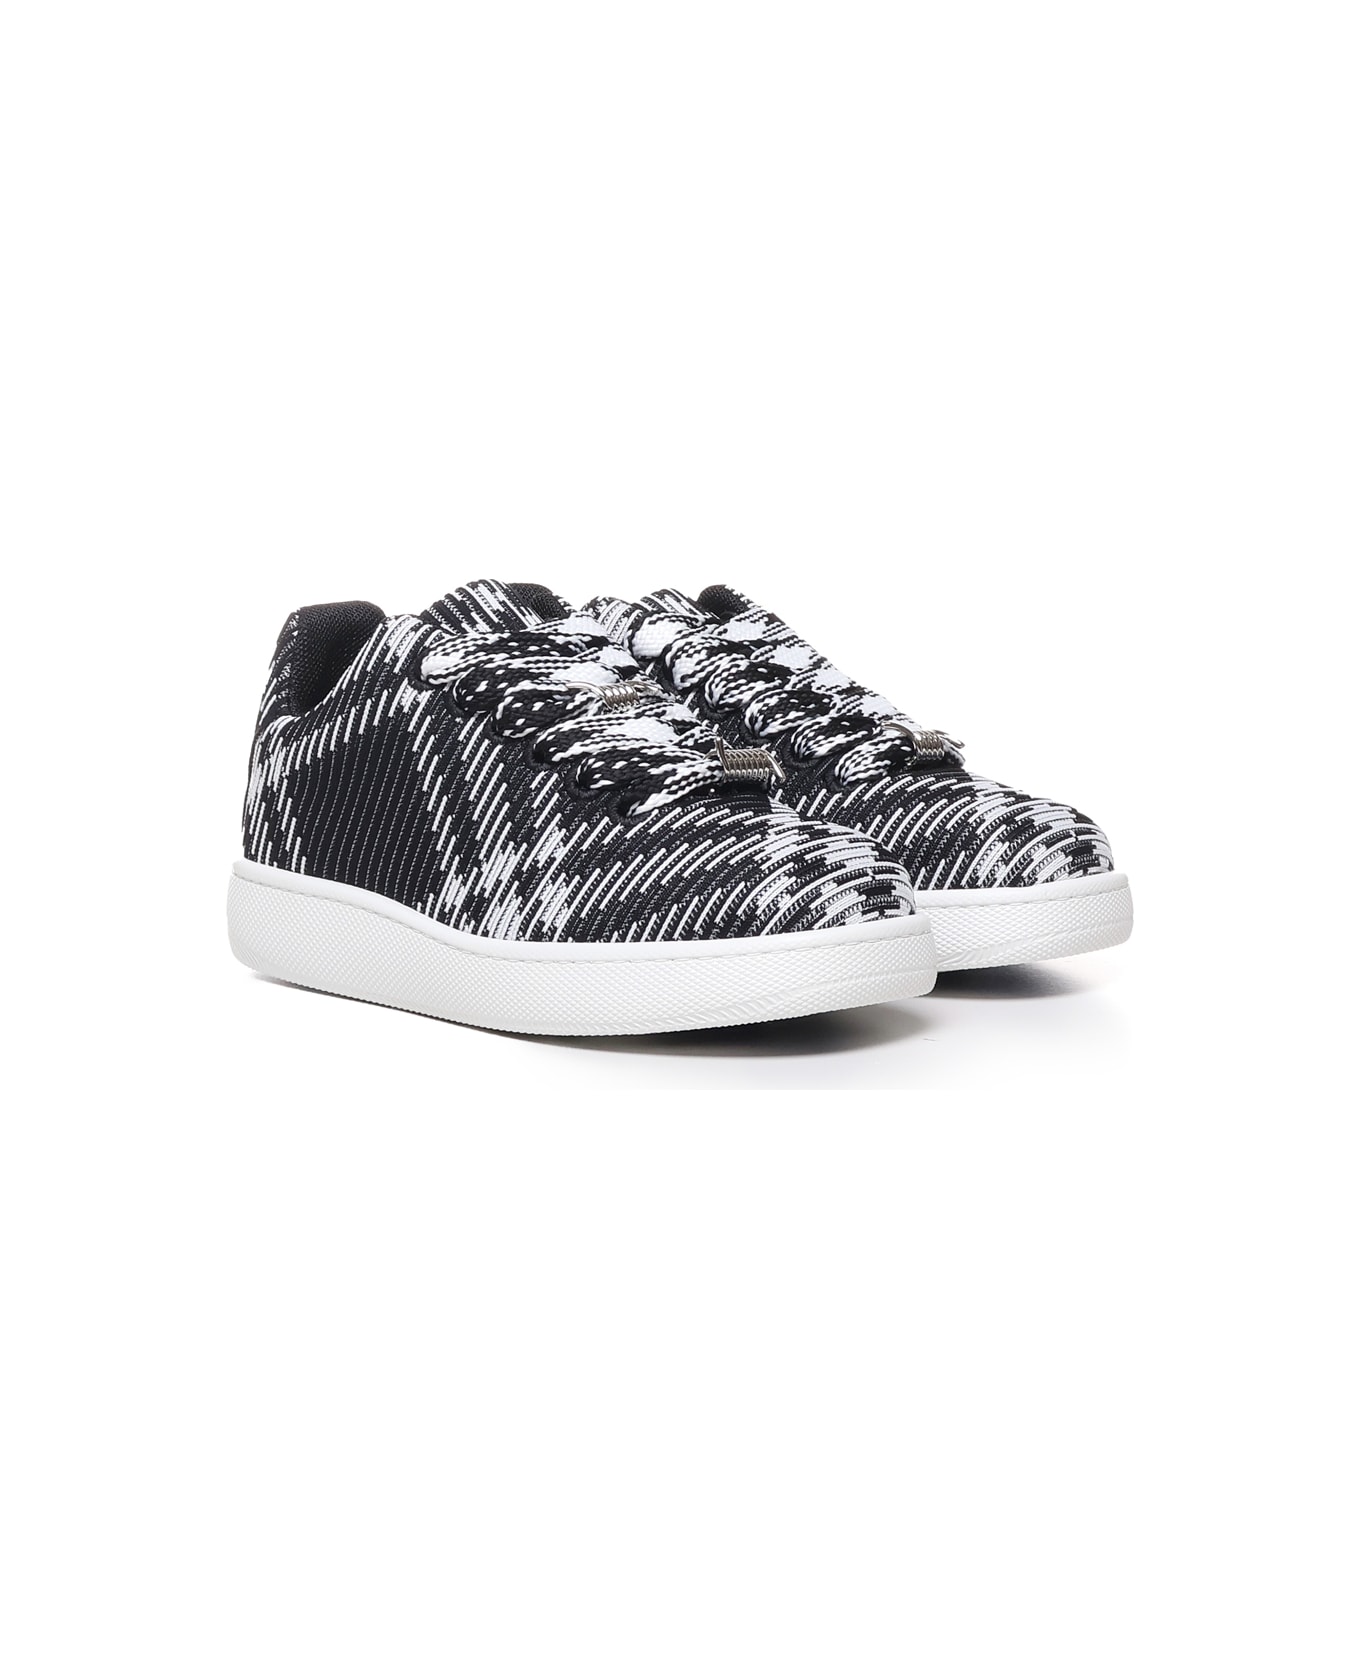 Burberry Box Sneaker With Check Workmanship - Black